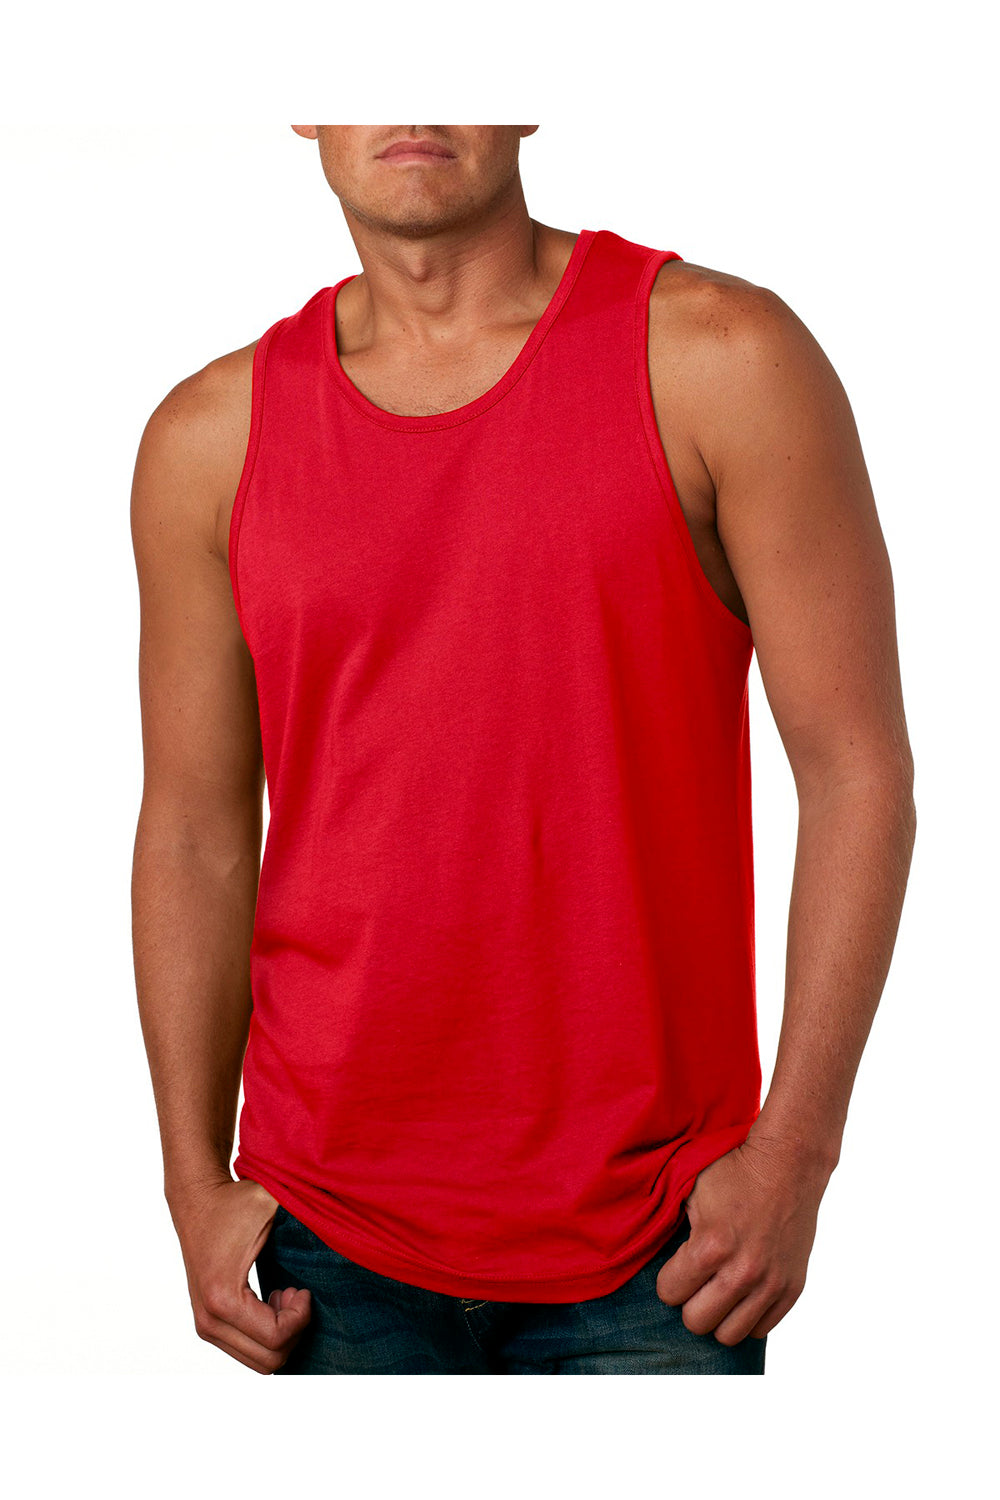 Next Level 3633 Mens Tank Top Red Front